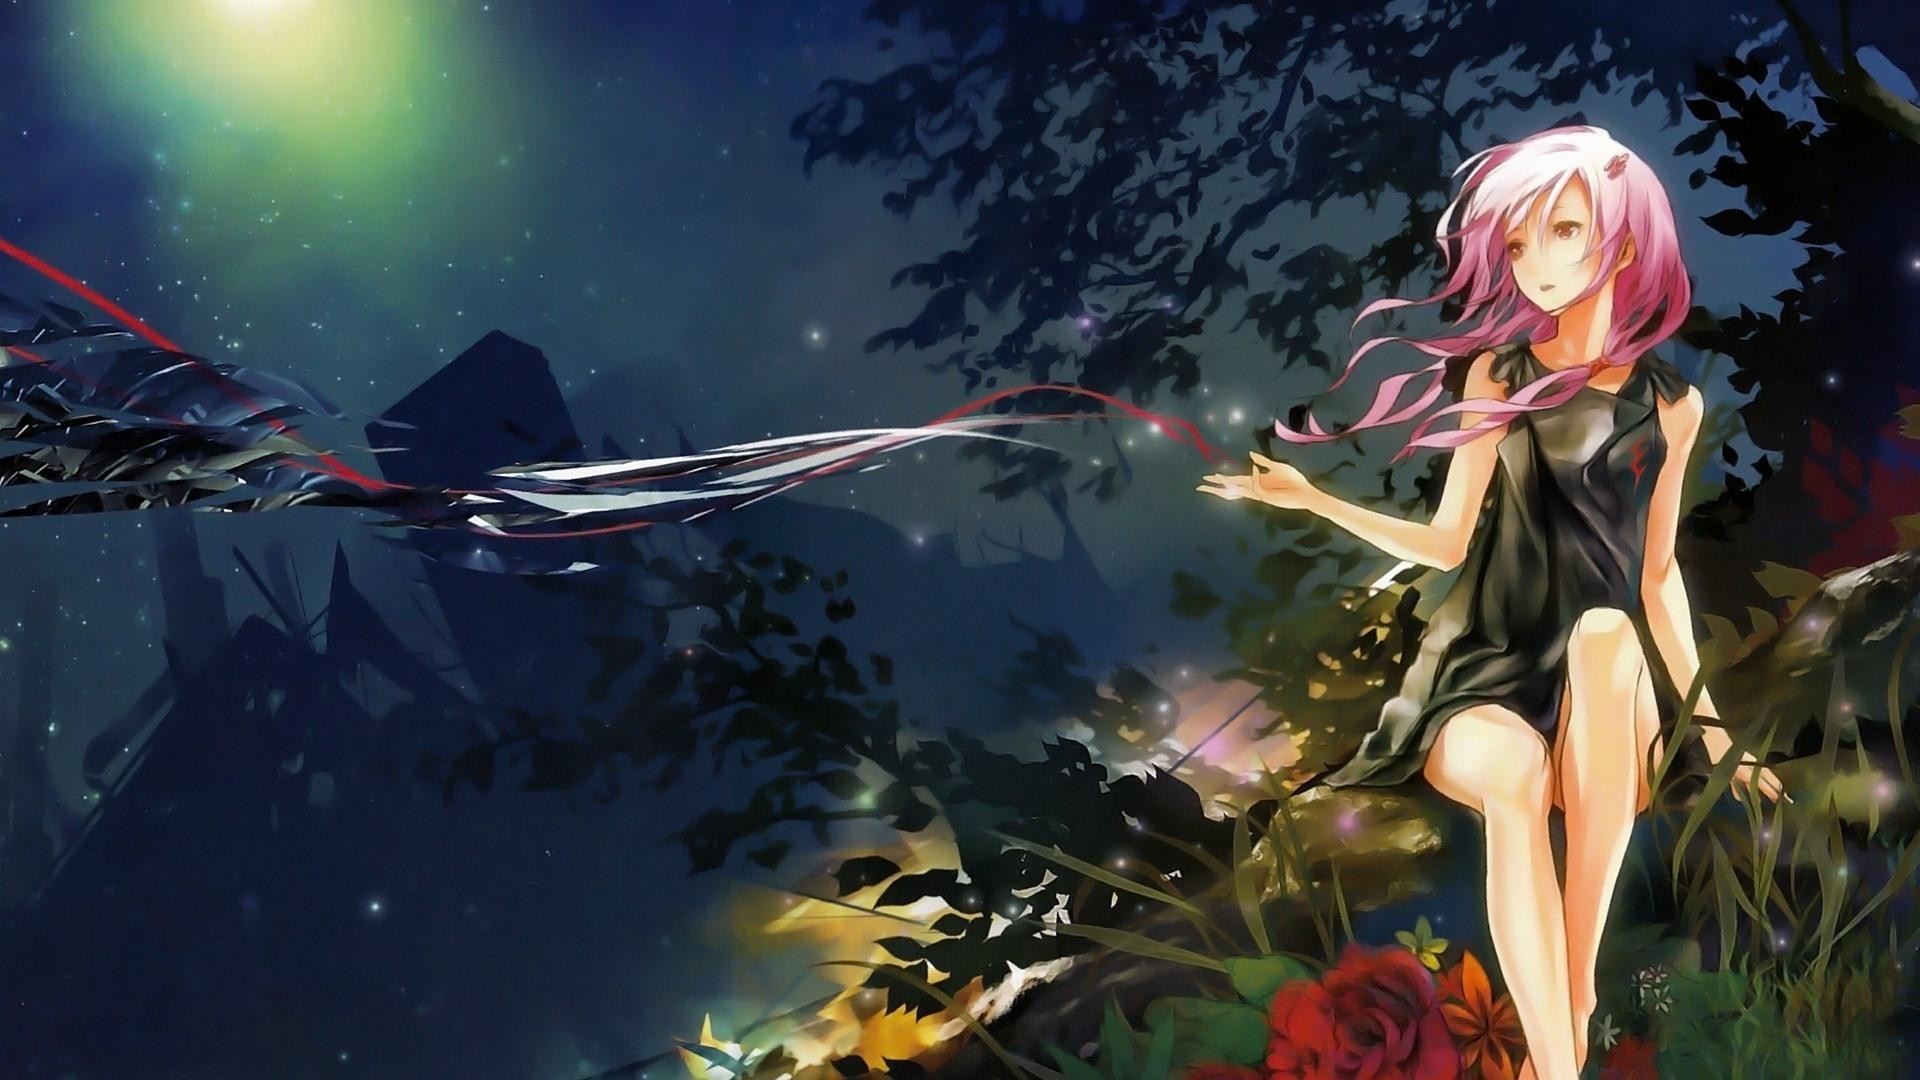 1920x1080 Anime Wallpaper ① Download Free Awesome Full Hd